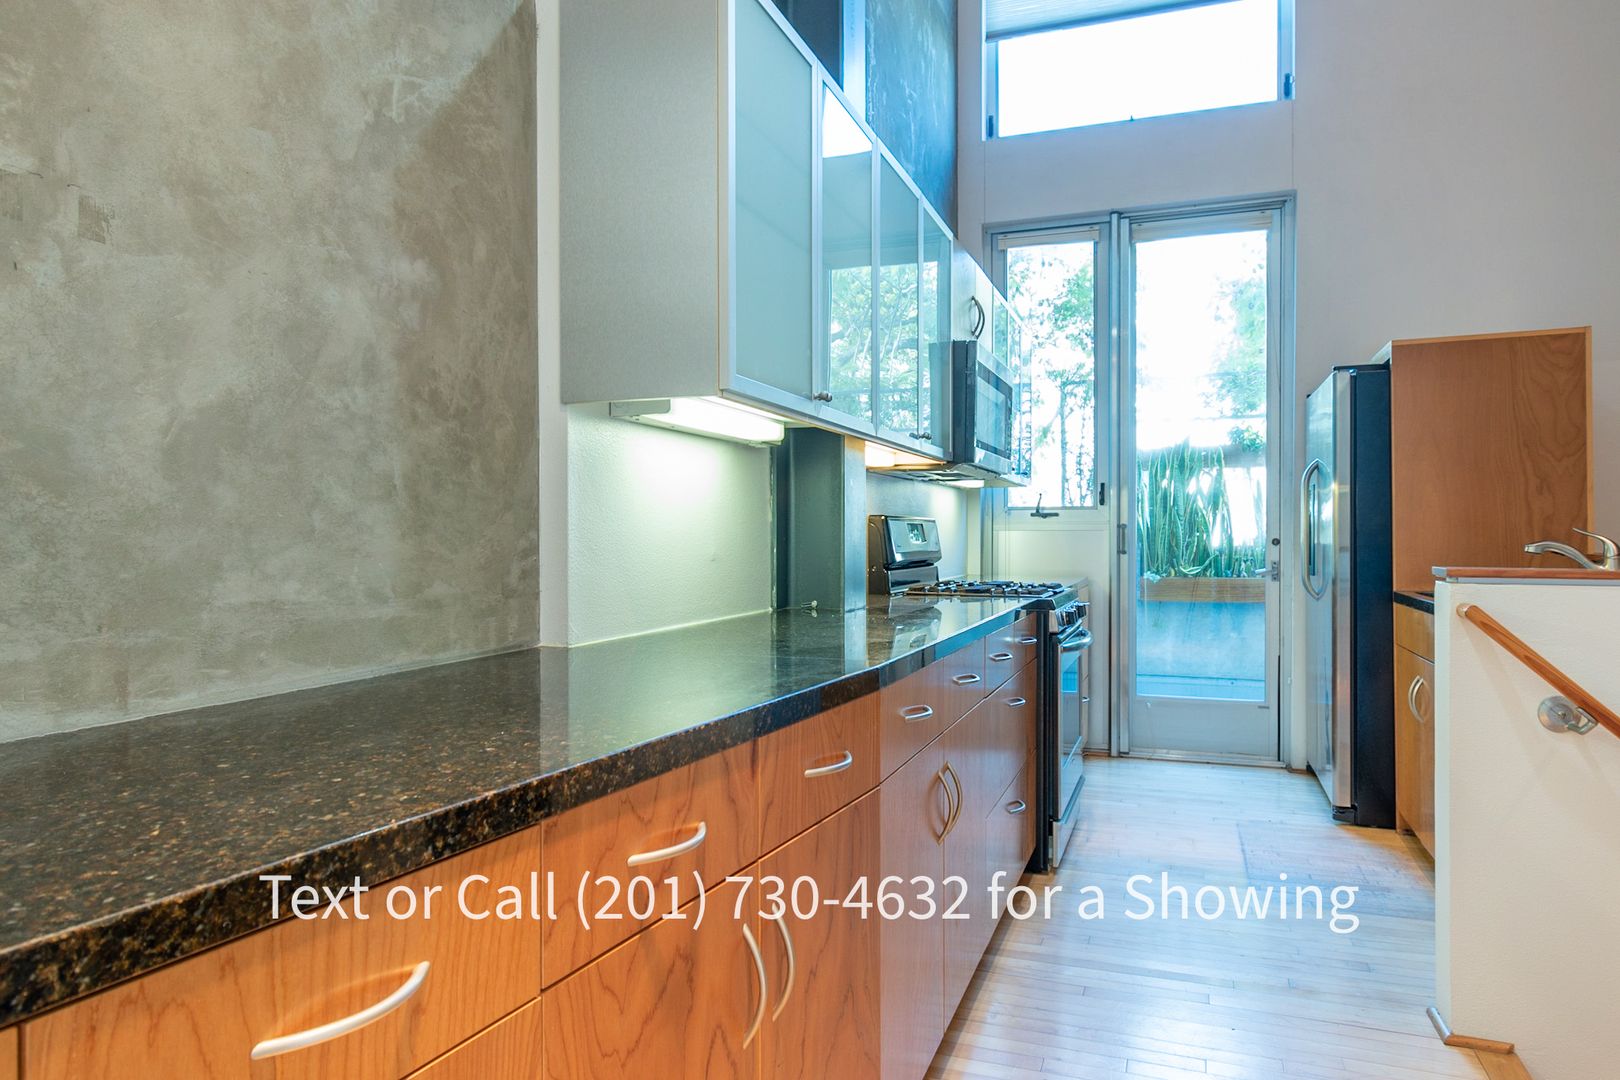 Modern Large 2 Bedroom, 2.5 Bath Rowhouse in Heart of Downtown